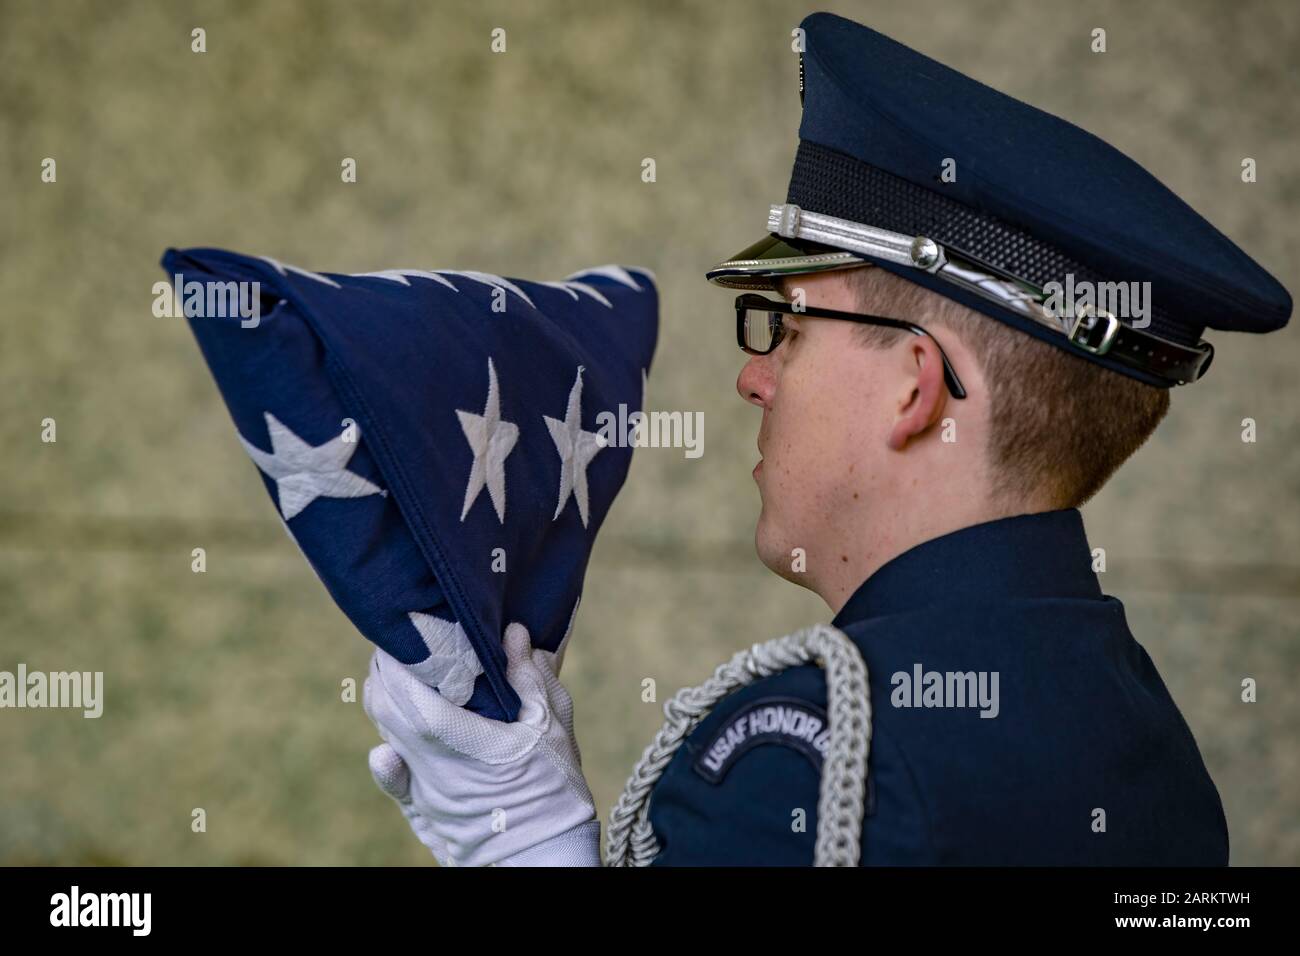 Senior Airman Donald Lambert, a member of the 130th Airlift Wing Honor Guard, inspects a flag before handing it off at the funeral of Brig. Gen. (ret.) James Kemp McLaughlin on Dec. 23, 2019, in Charleston, W.Va. McLaughlin was a World War II B-17 Flying Fortress pilot who flew 39 total combat missions and was the founder and first commander of the West Virginia Air National Guard. McLaughlin died Dec. 15, 2019 at the age of 101. (U.S. Air National Guard Photo by Senior Airman Caleb Vance) Stock Photo